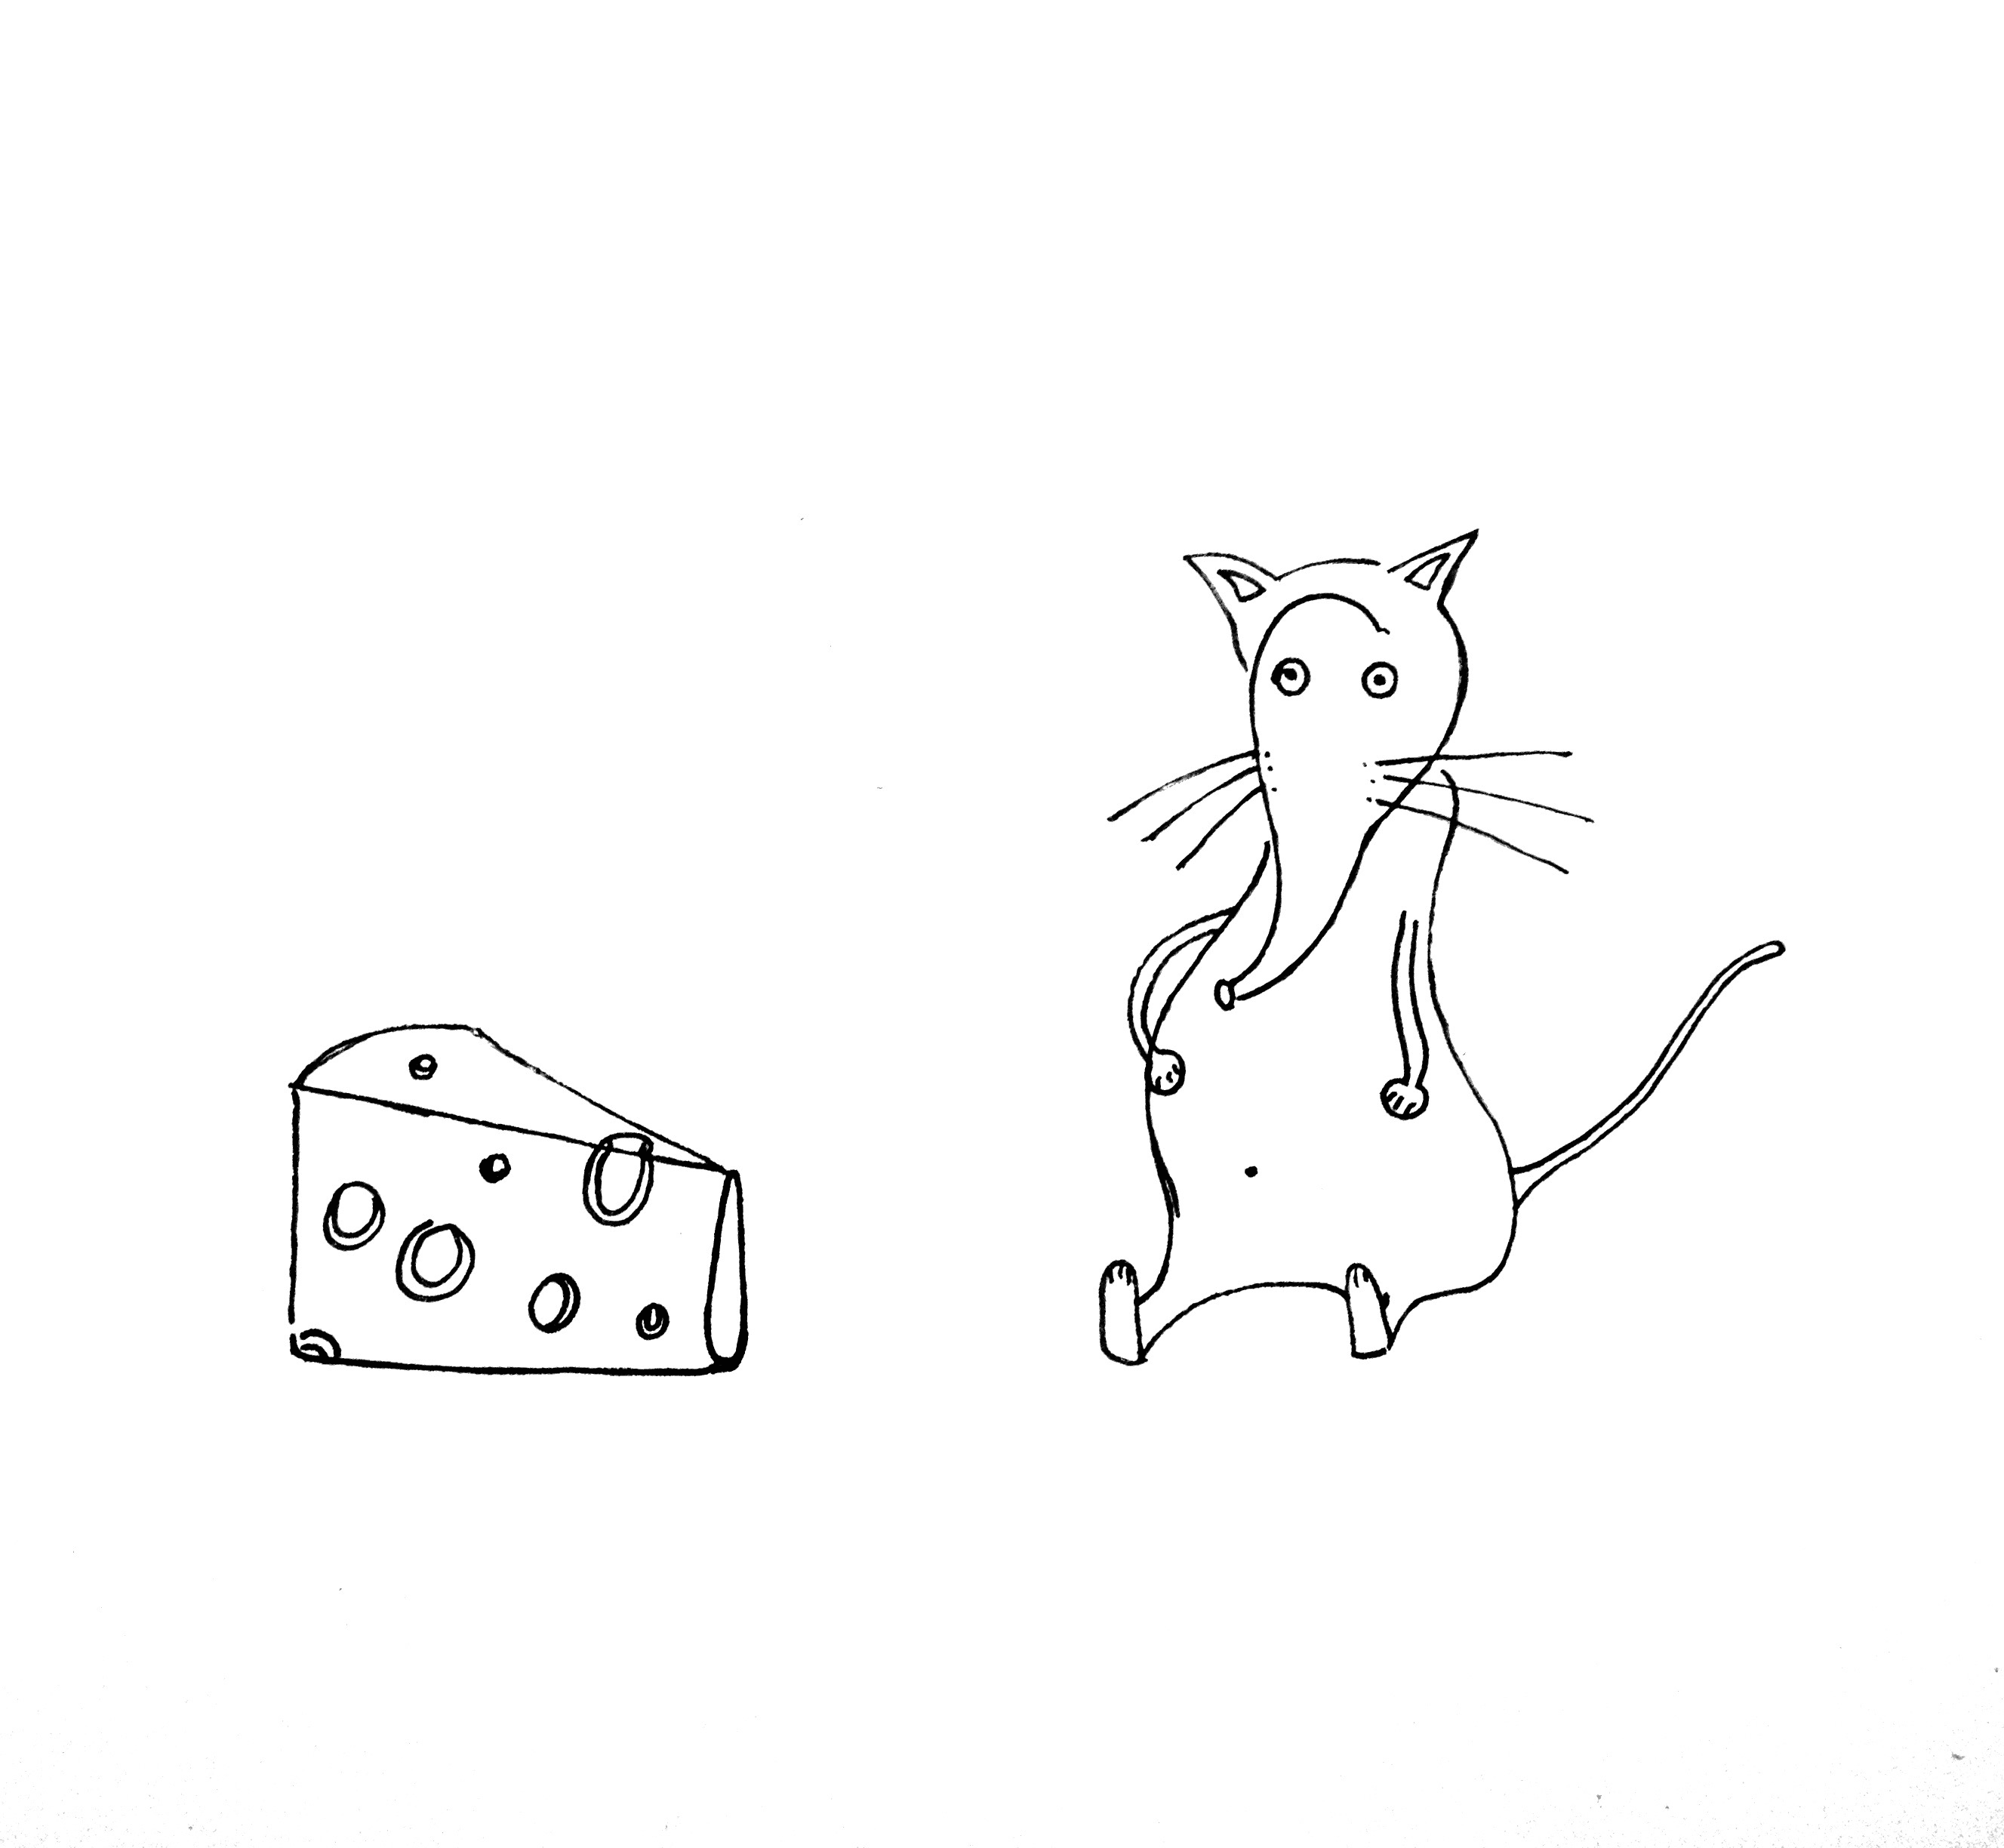 mouse + cheese